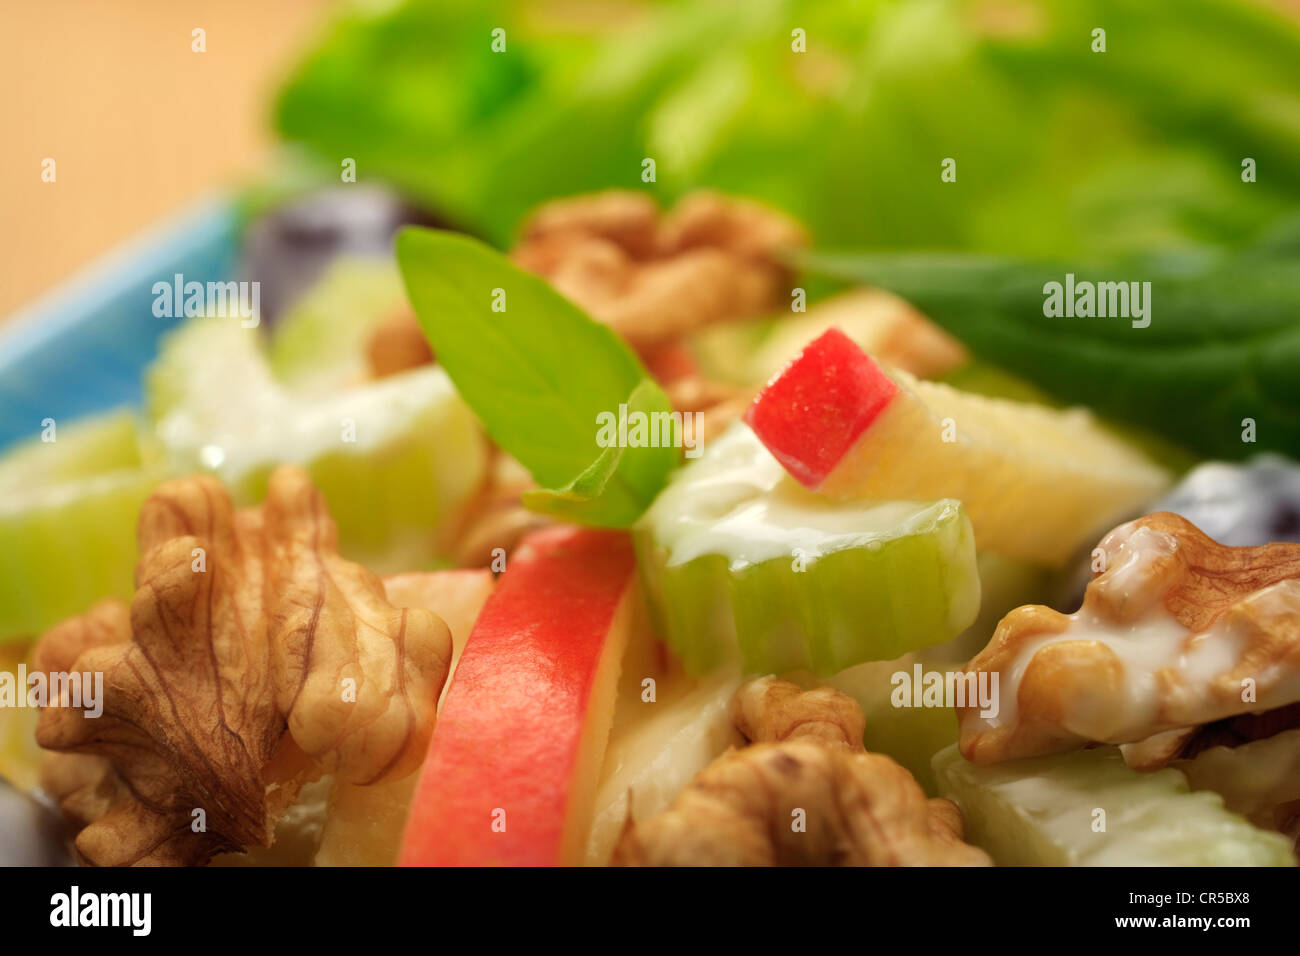 Classic Waldorf Salad - red skinned apple, walnuts, chopped celery and grapes in a creamy dressing. Stock Photo